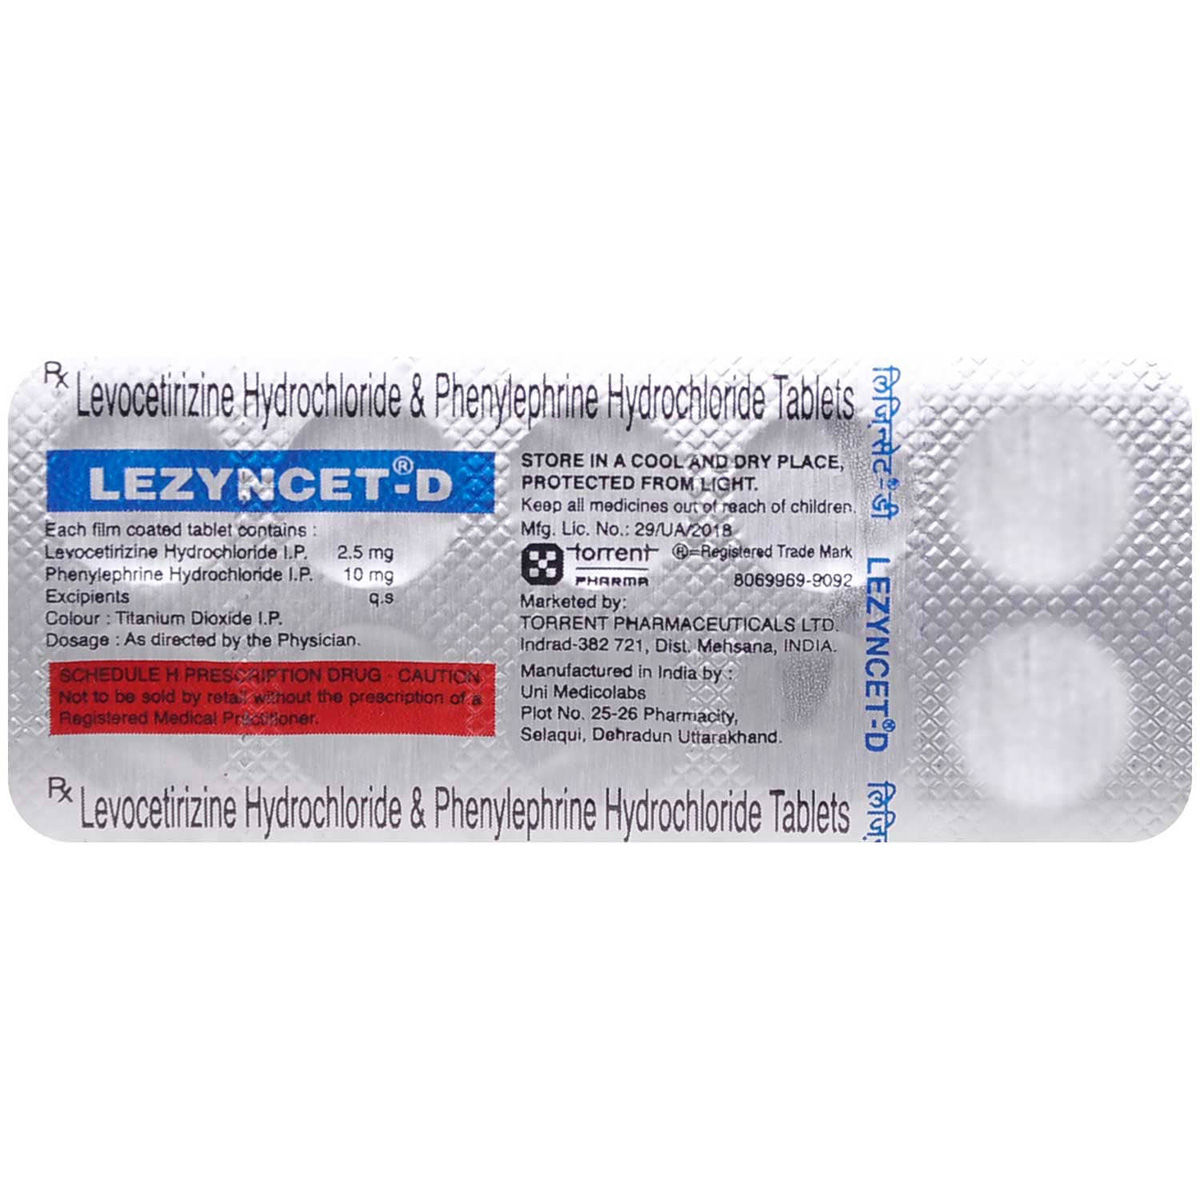 Lezyncet-D Tablet 10's Price, Uses, Side Effects, Composition ...